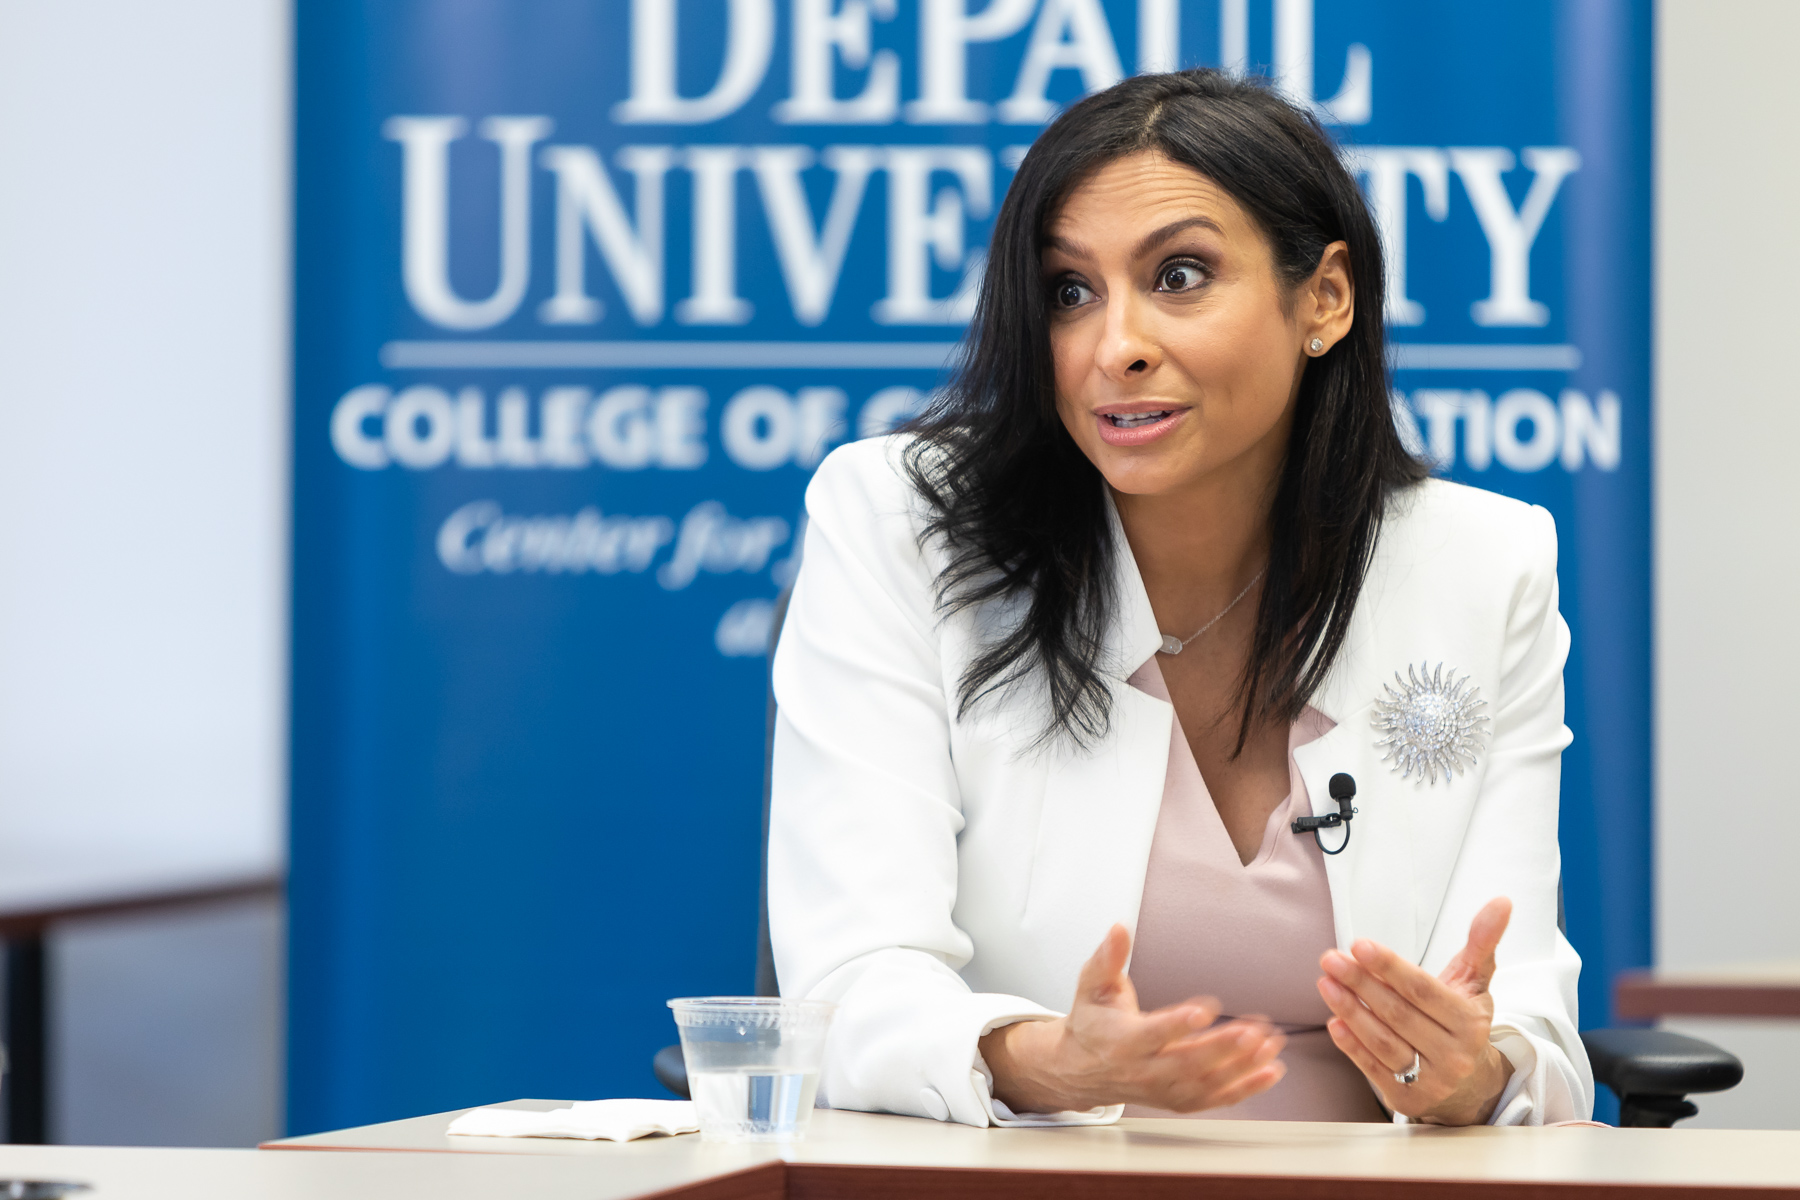 Lourdes Duarte, an investigative reporter and co-anchor for WGN News and a DePaul alumna, shares her professional experience with College of Communication journalism students. (DePaul University/Jeff Carrion)